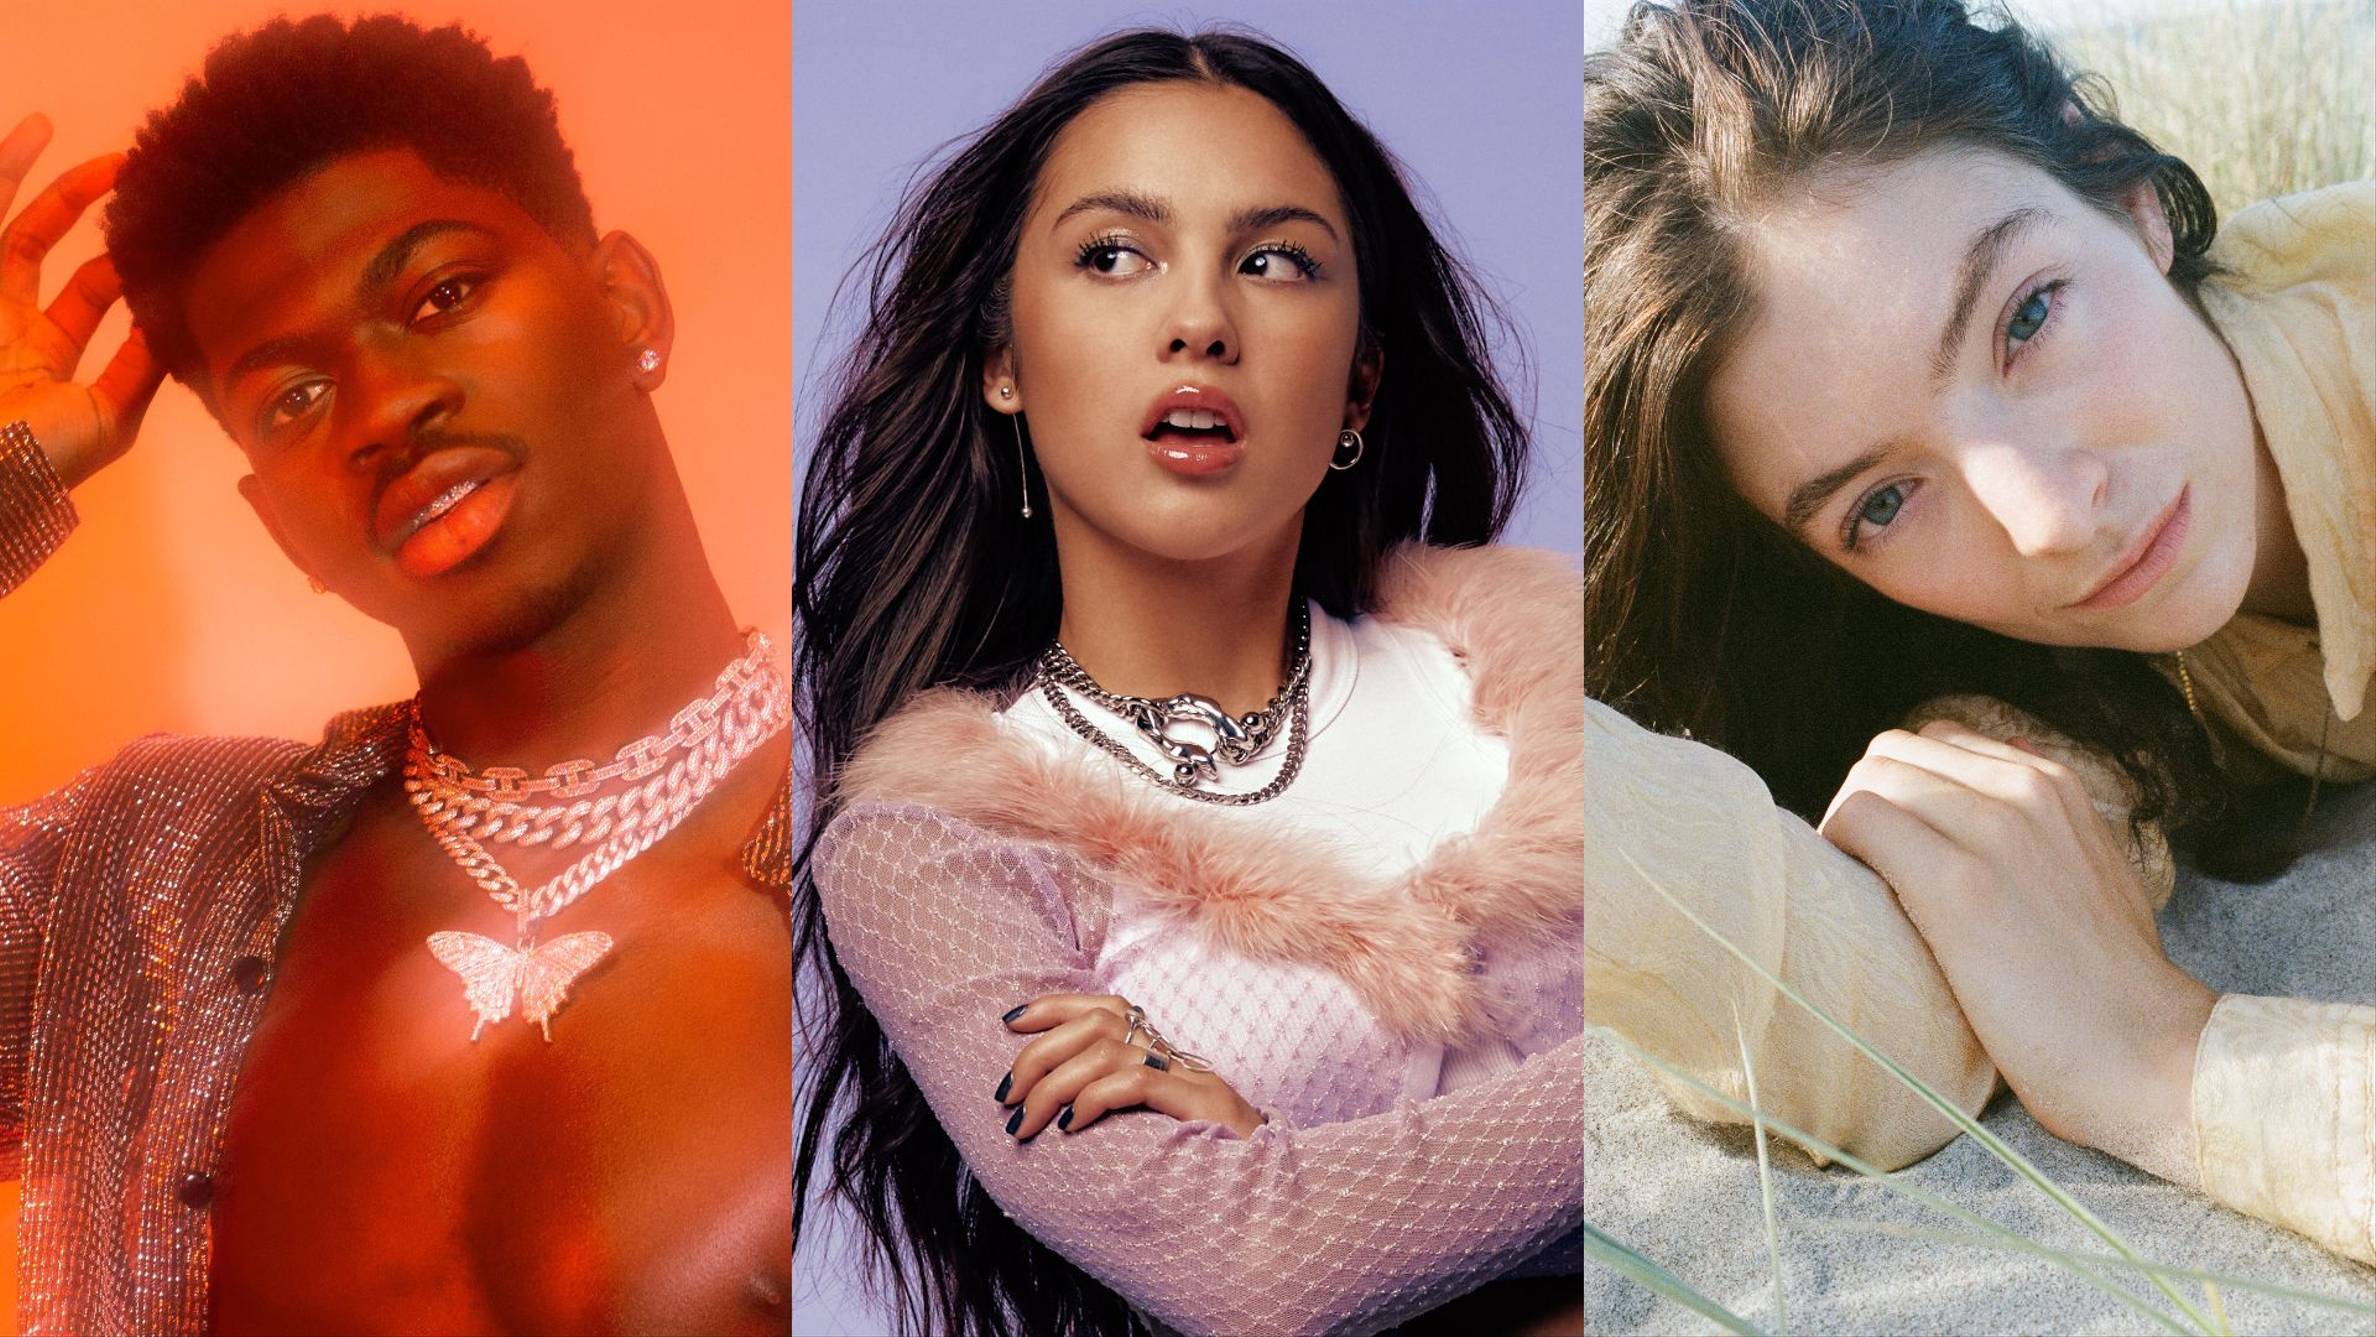 MTV VMAs performance line-up including lil nas x, olivia rodrigo, lorde all performing at awards show picture of them together composite